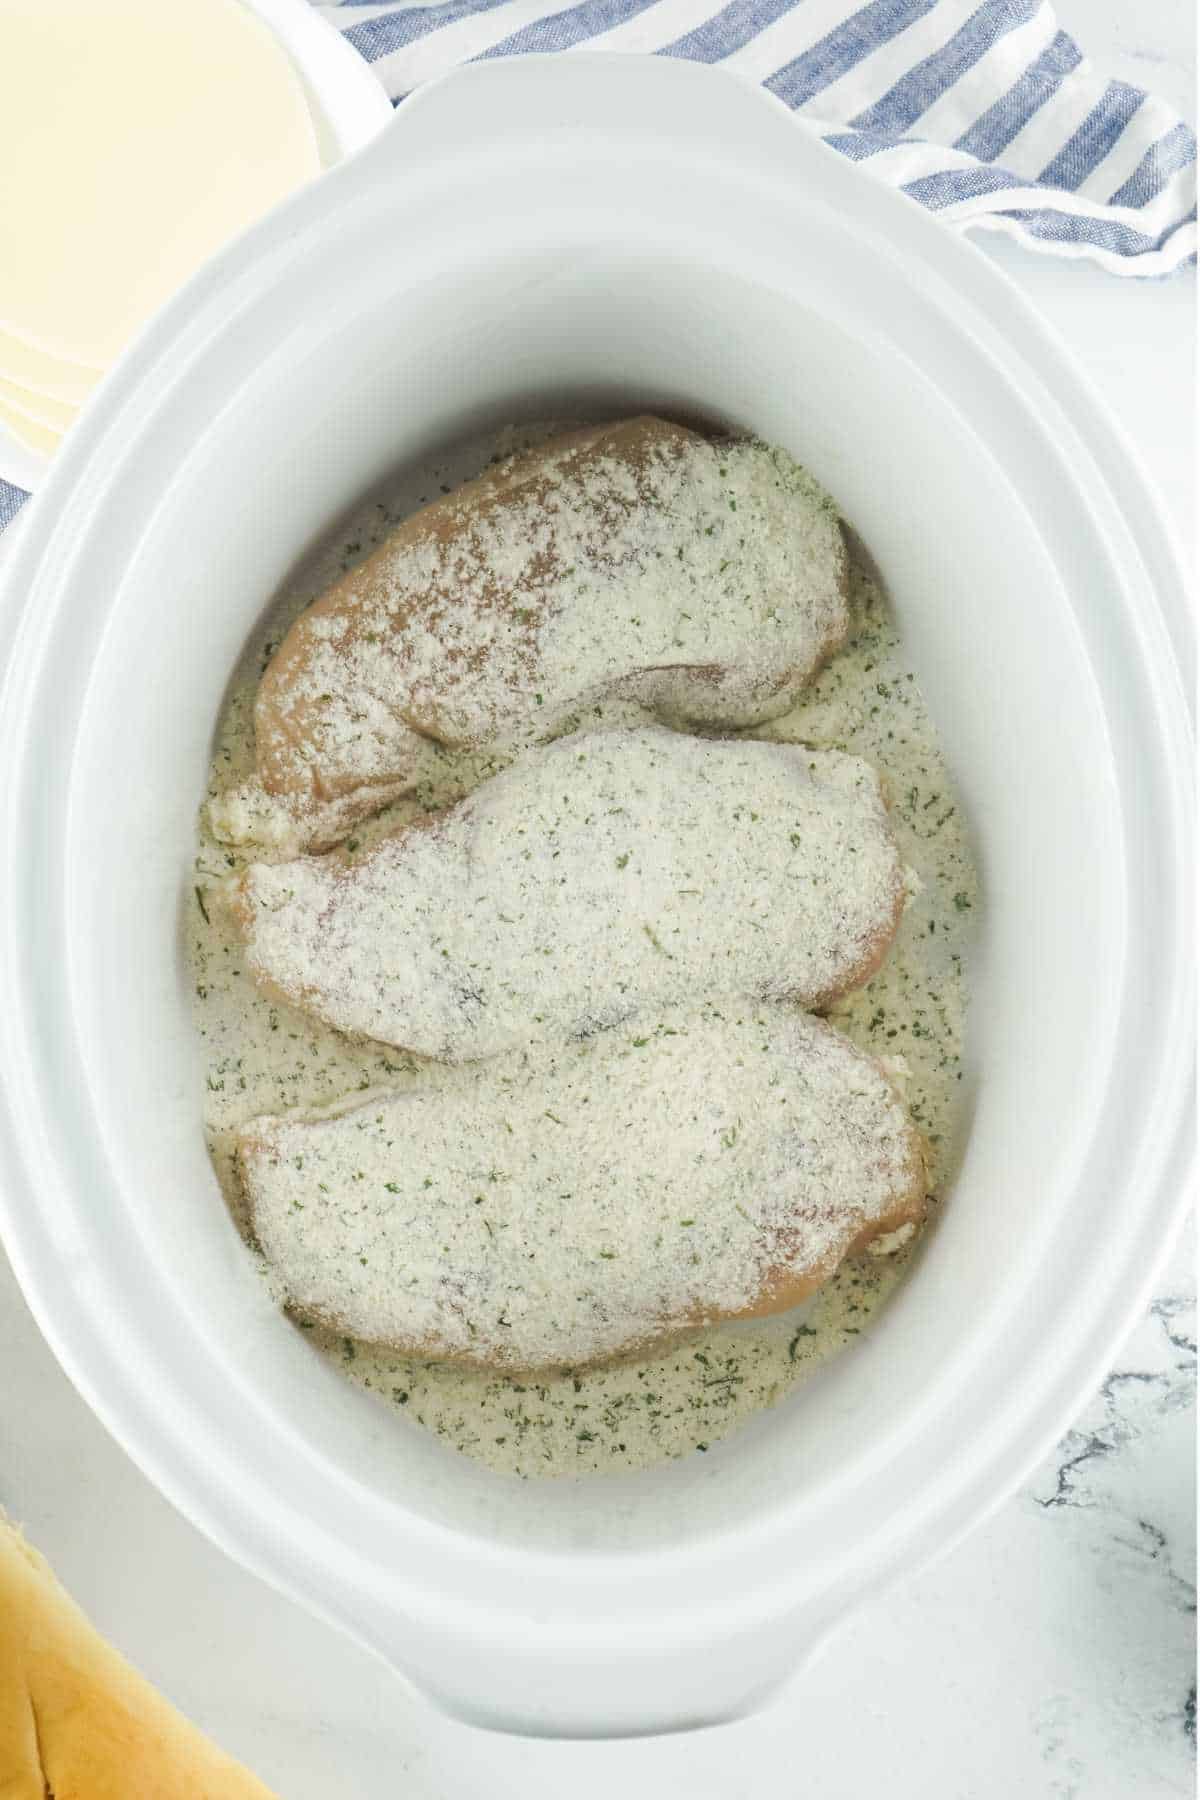 Ranch salad dressing sprinkled on top of chicken in a crockpot.